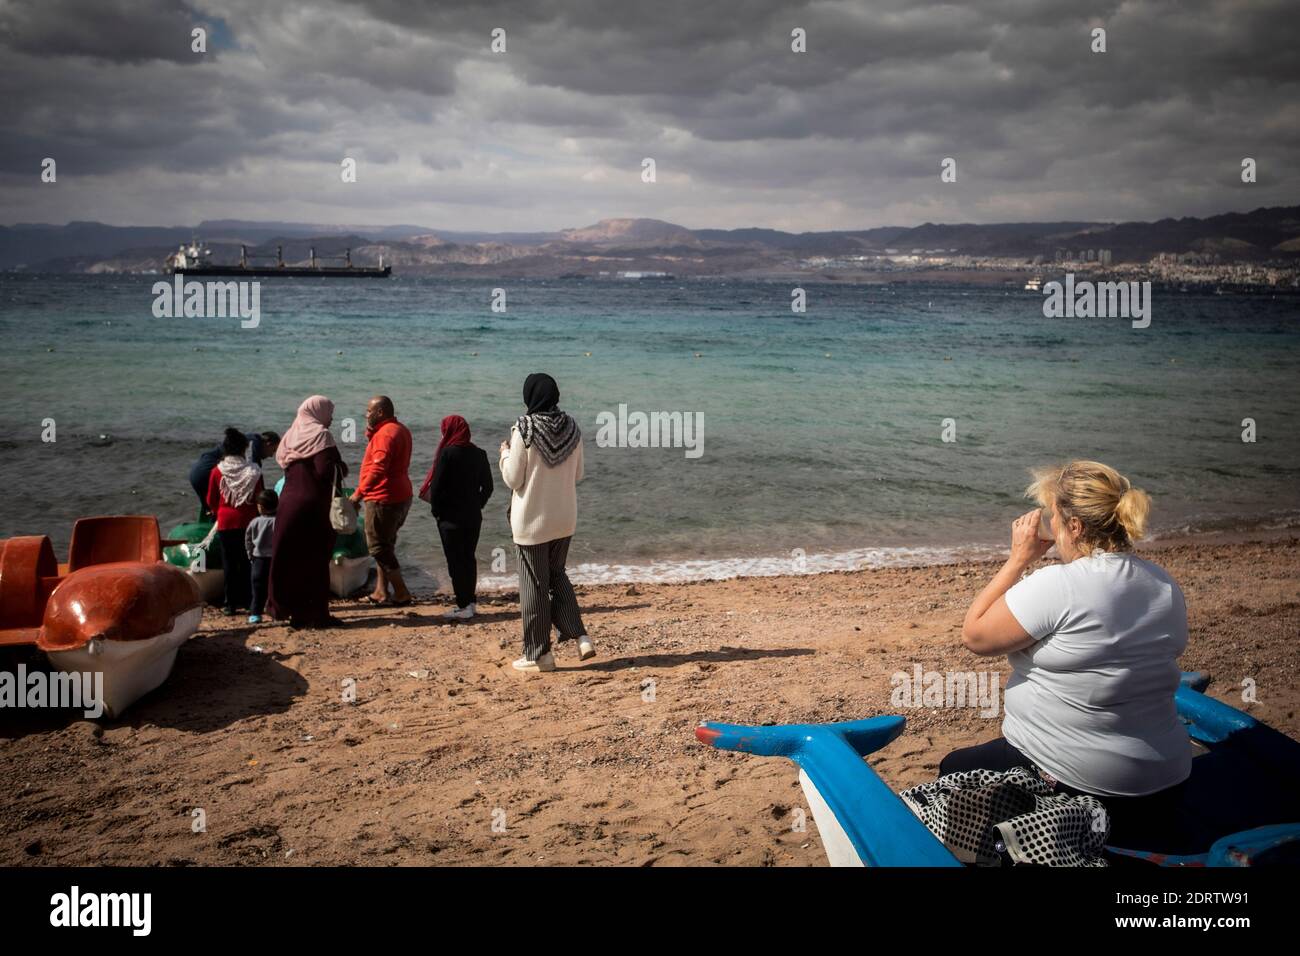 A turist and a local family in a beach in Aqaba, Jordan. On the other side Israel coast. Stock Photo